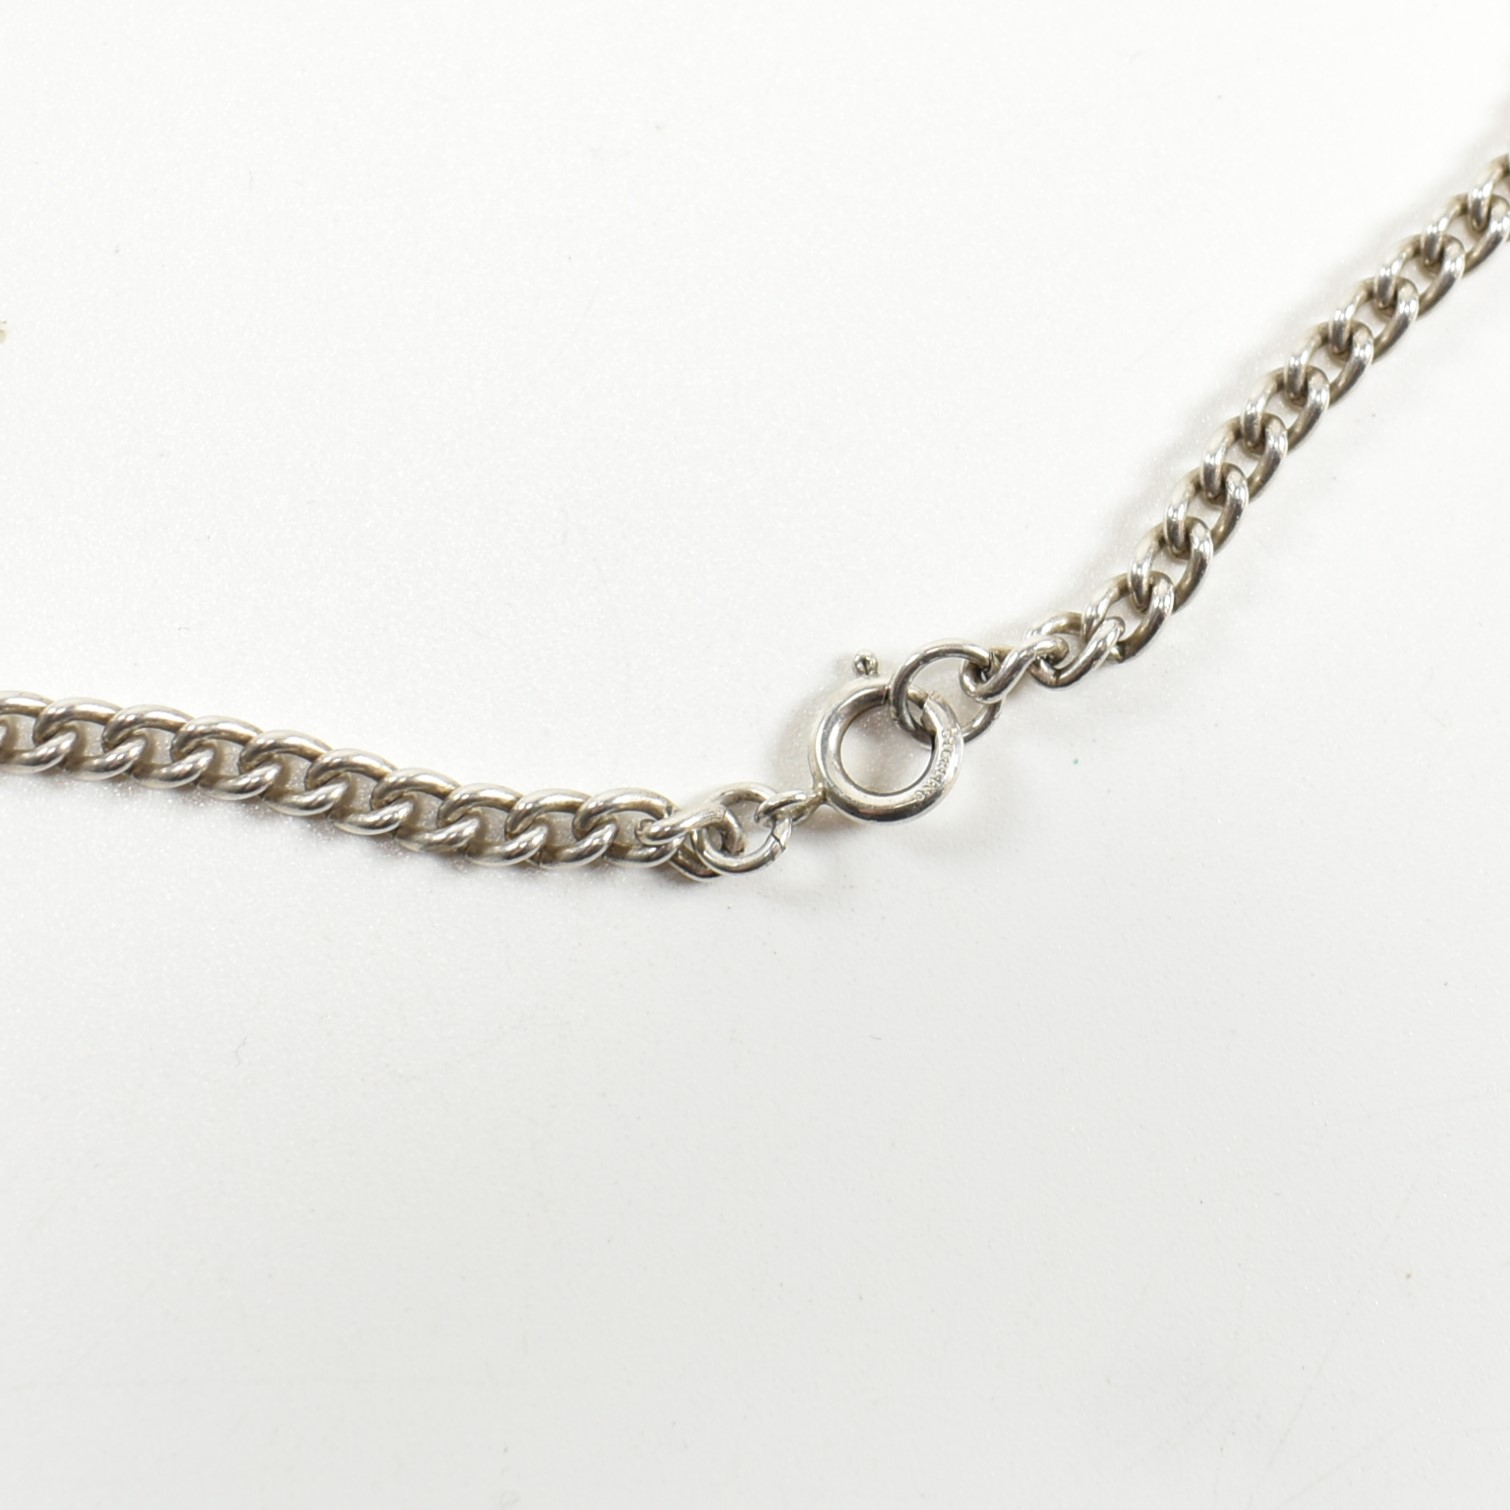 HALLMARKED SILVER ALBERT CHAIN SHIELD FOB ON CURB LINK CHAIN NECKLACE - Image 4 of 6